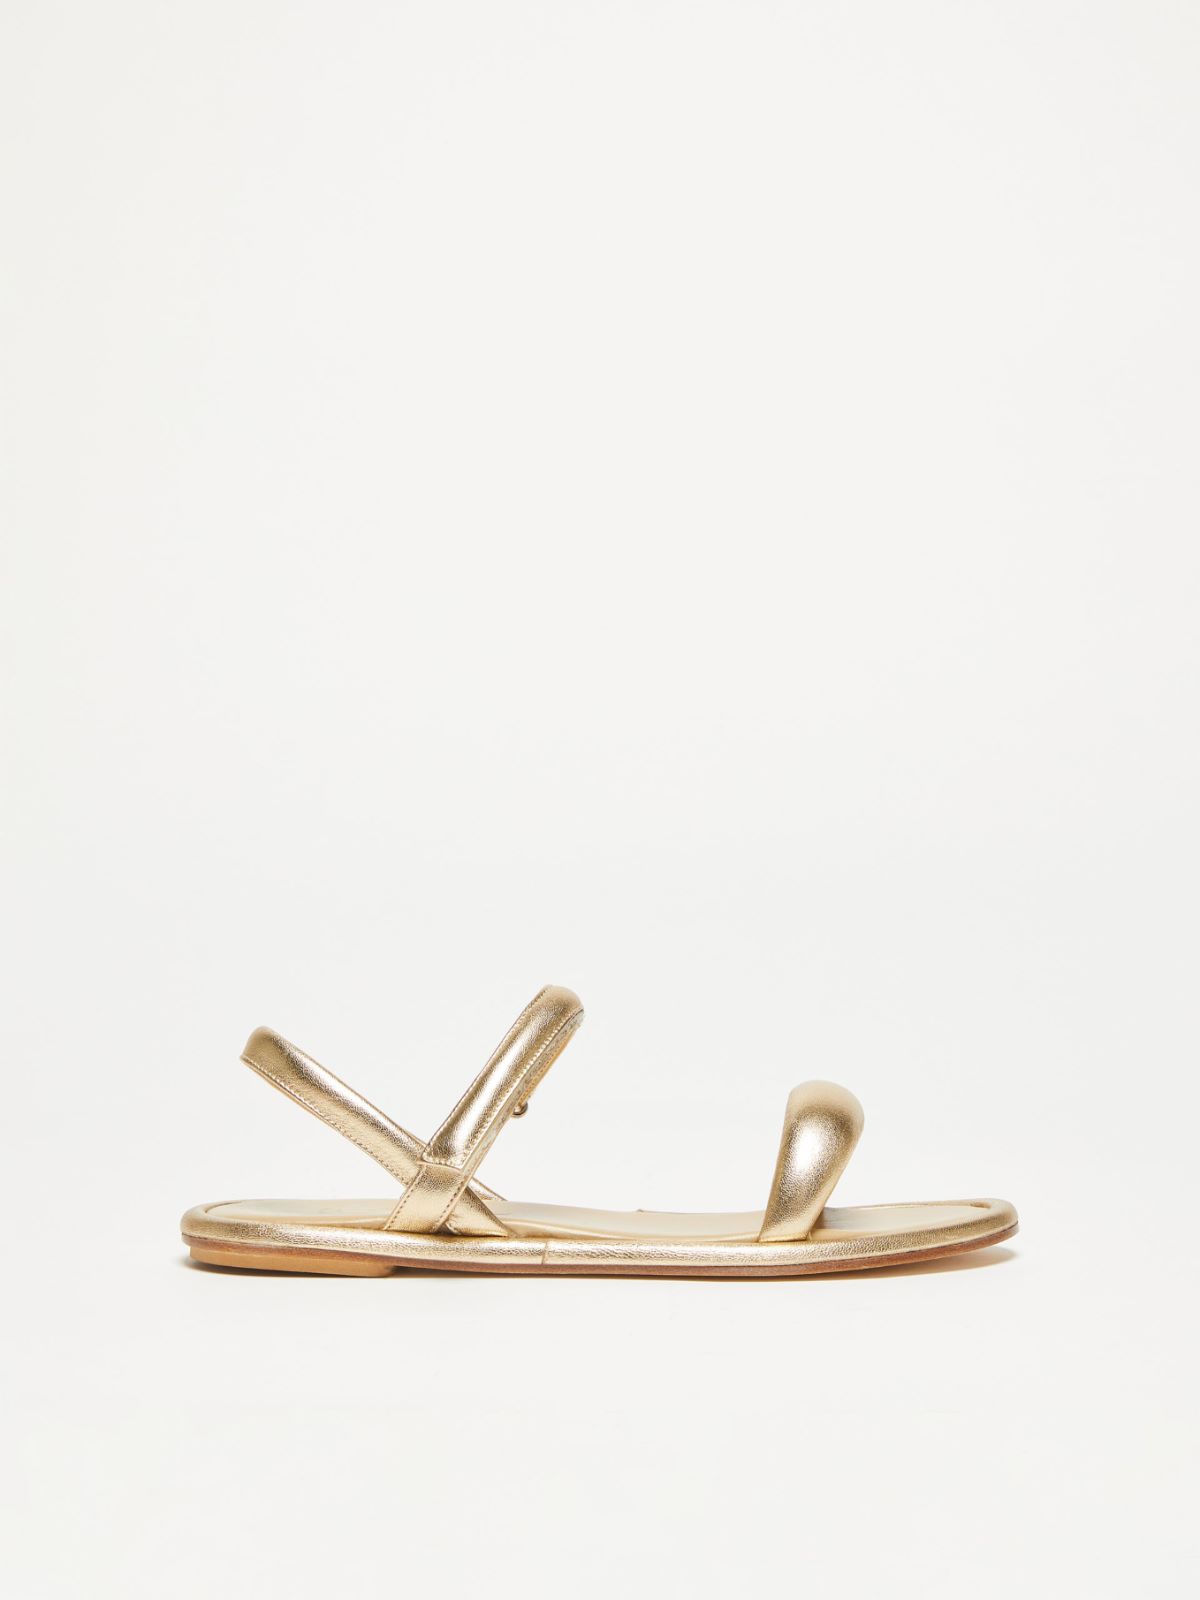 Sandals in nappa leather - GOLD - Weekend Max Mara